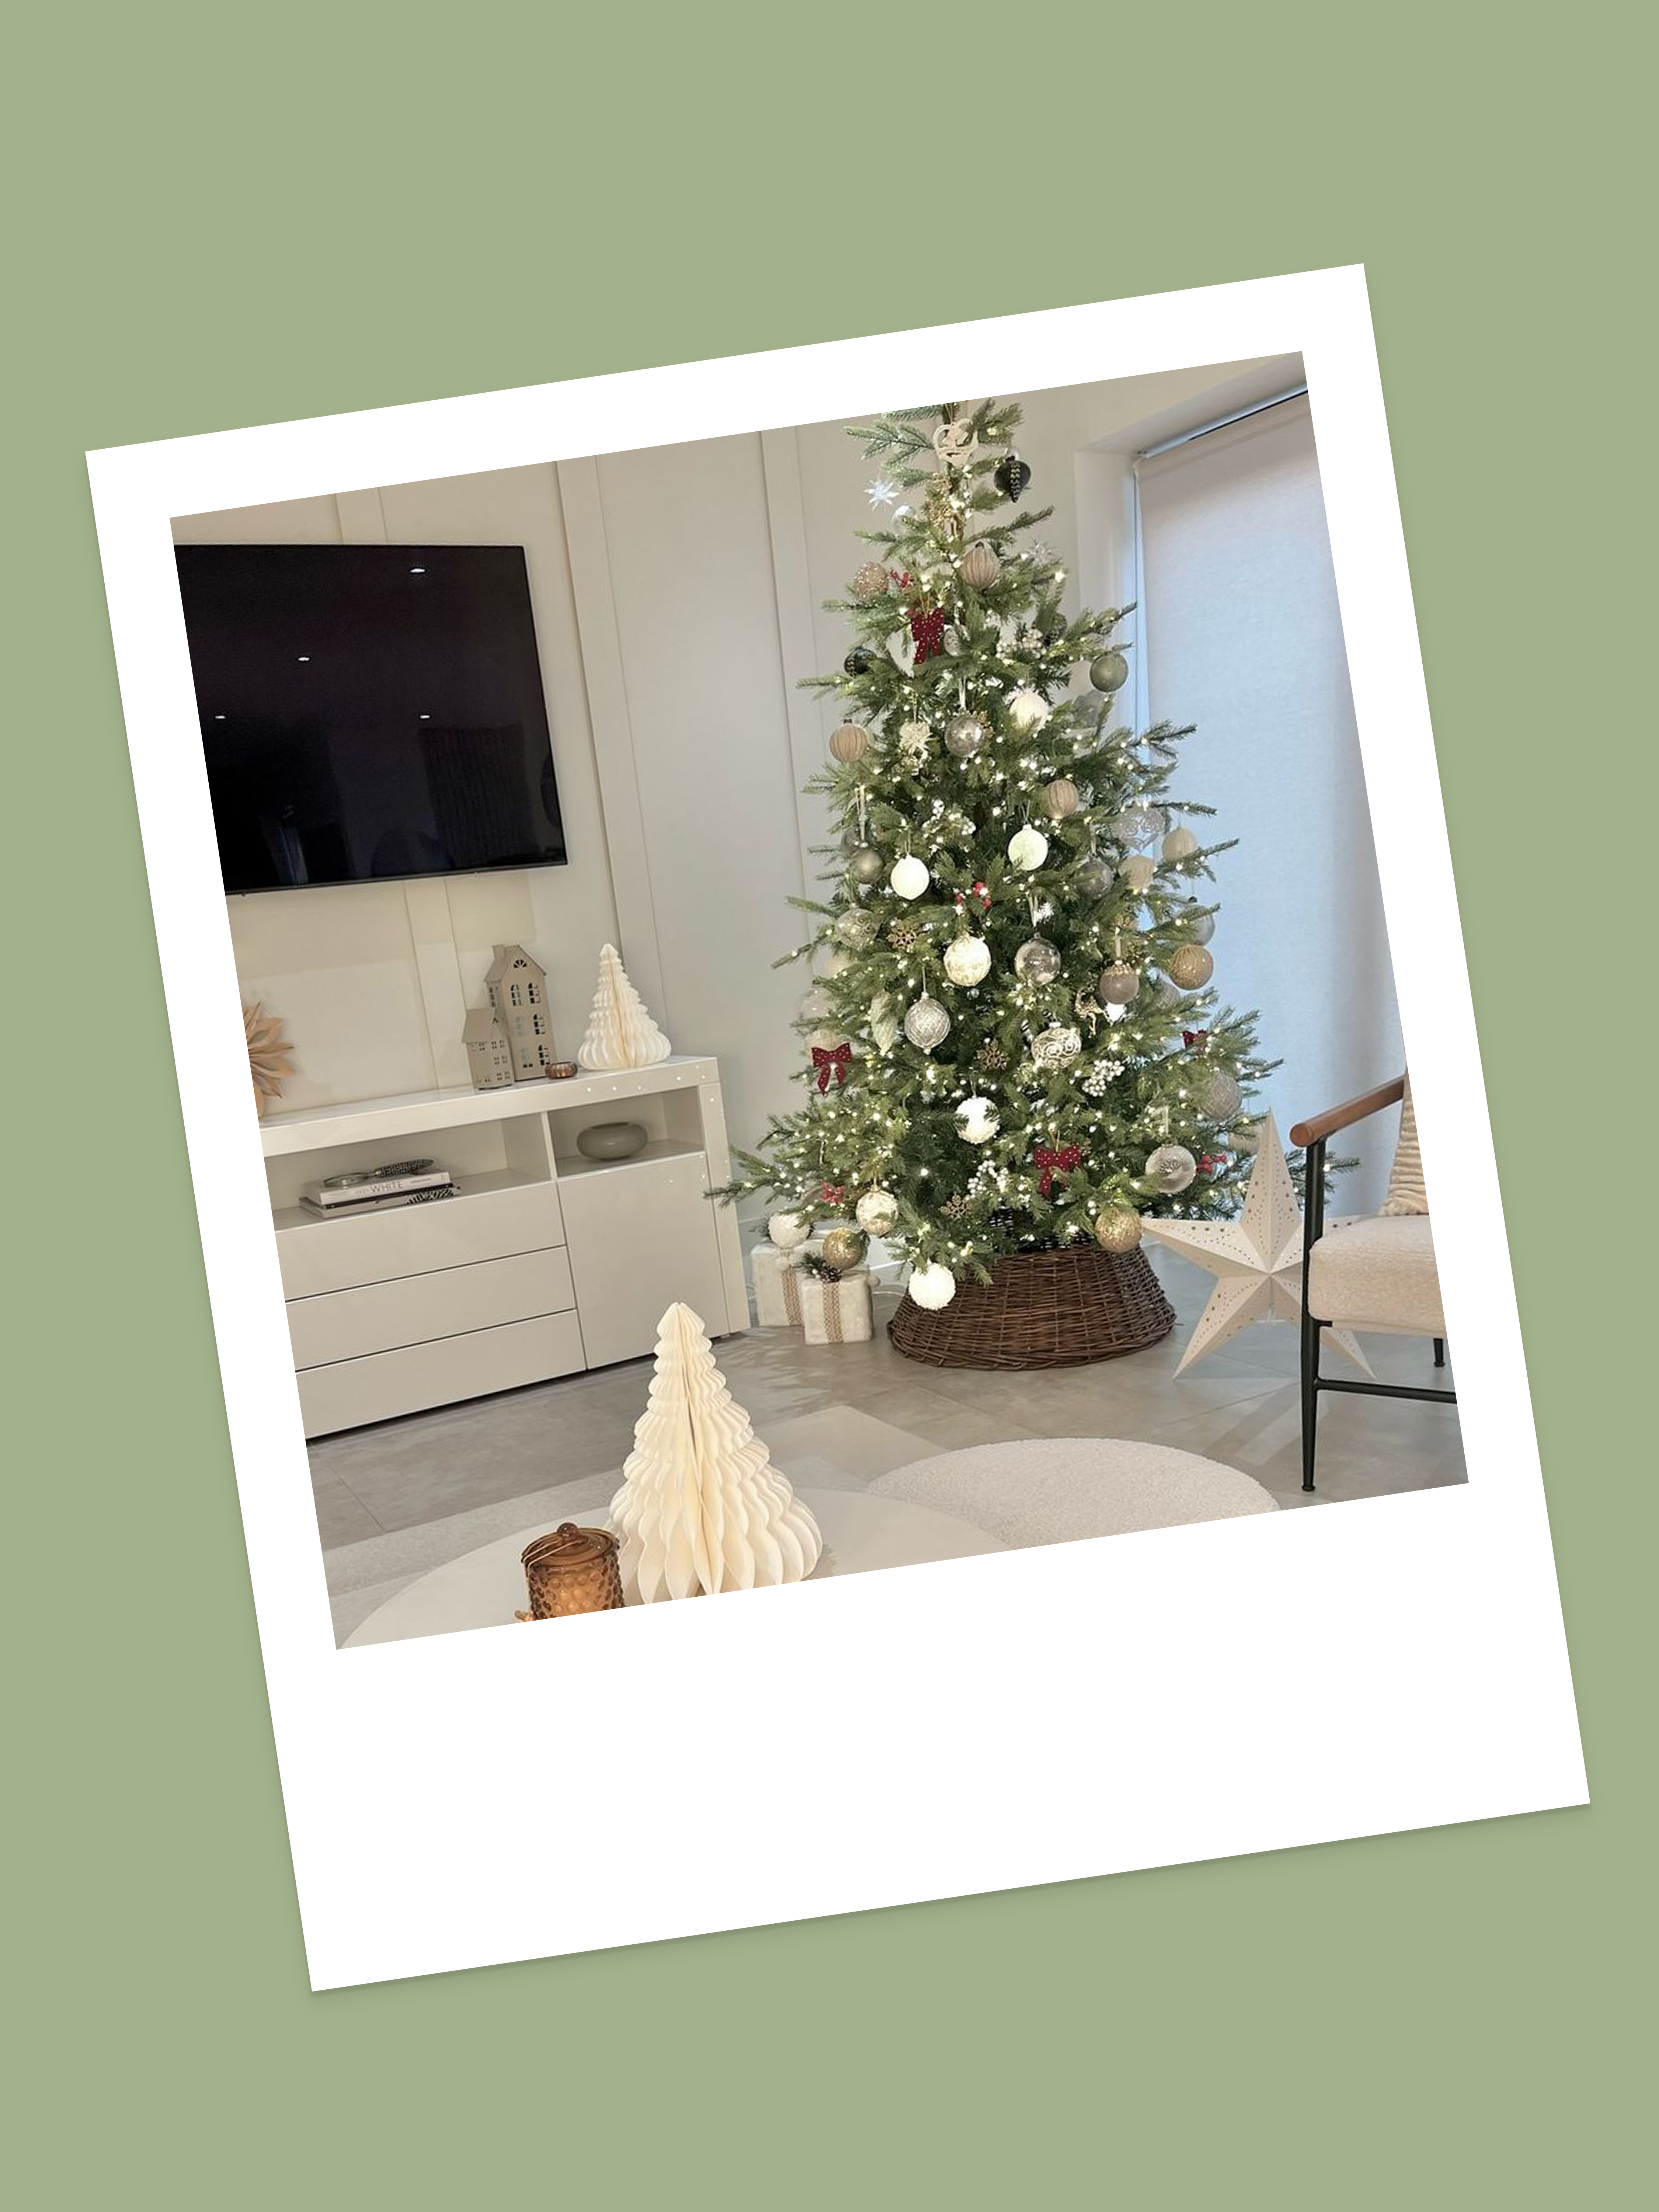 Polaroid image of a Christmas tree with white and gold decorations and a brown tree skirt